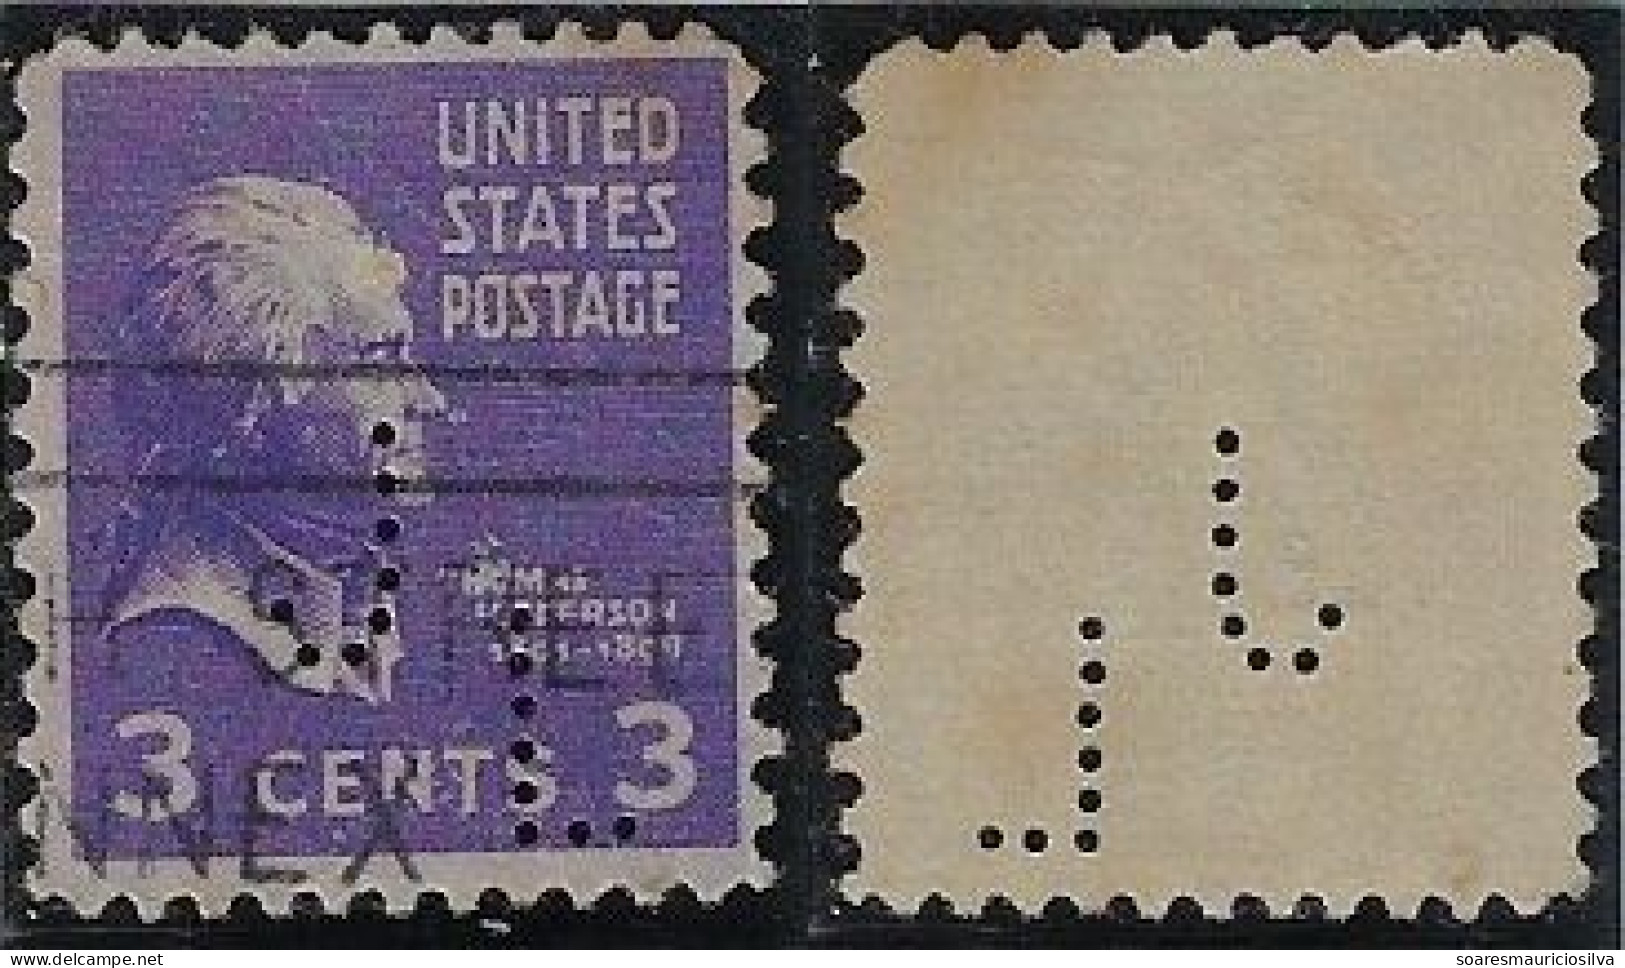 USA United States 1923/1938 Stamp With Perfin JL By John Lucas & Company Incorported From New York Lochung Perfore - Perfin